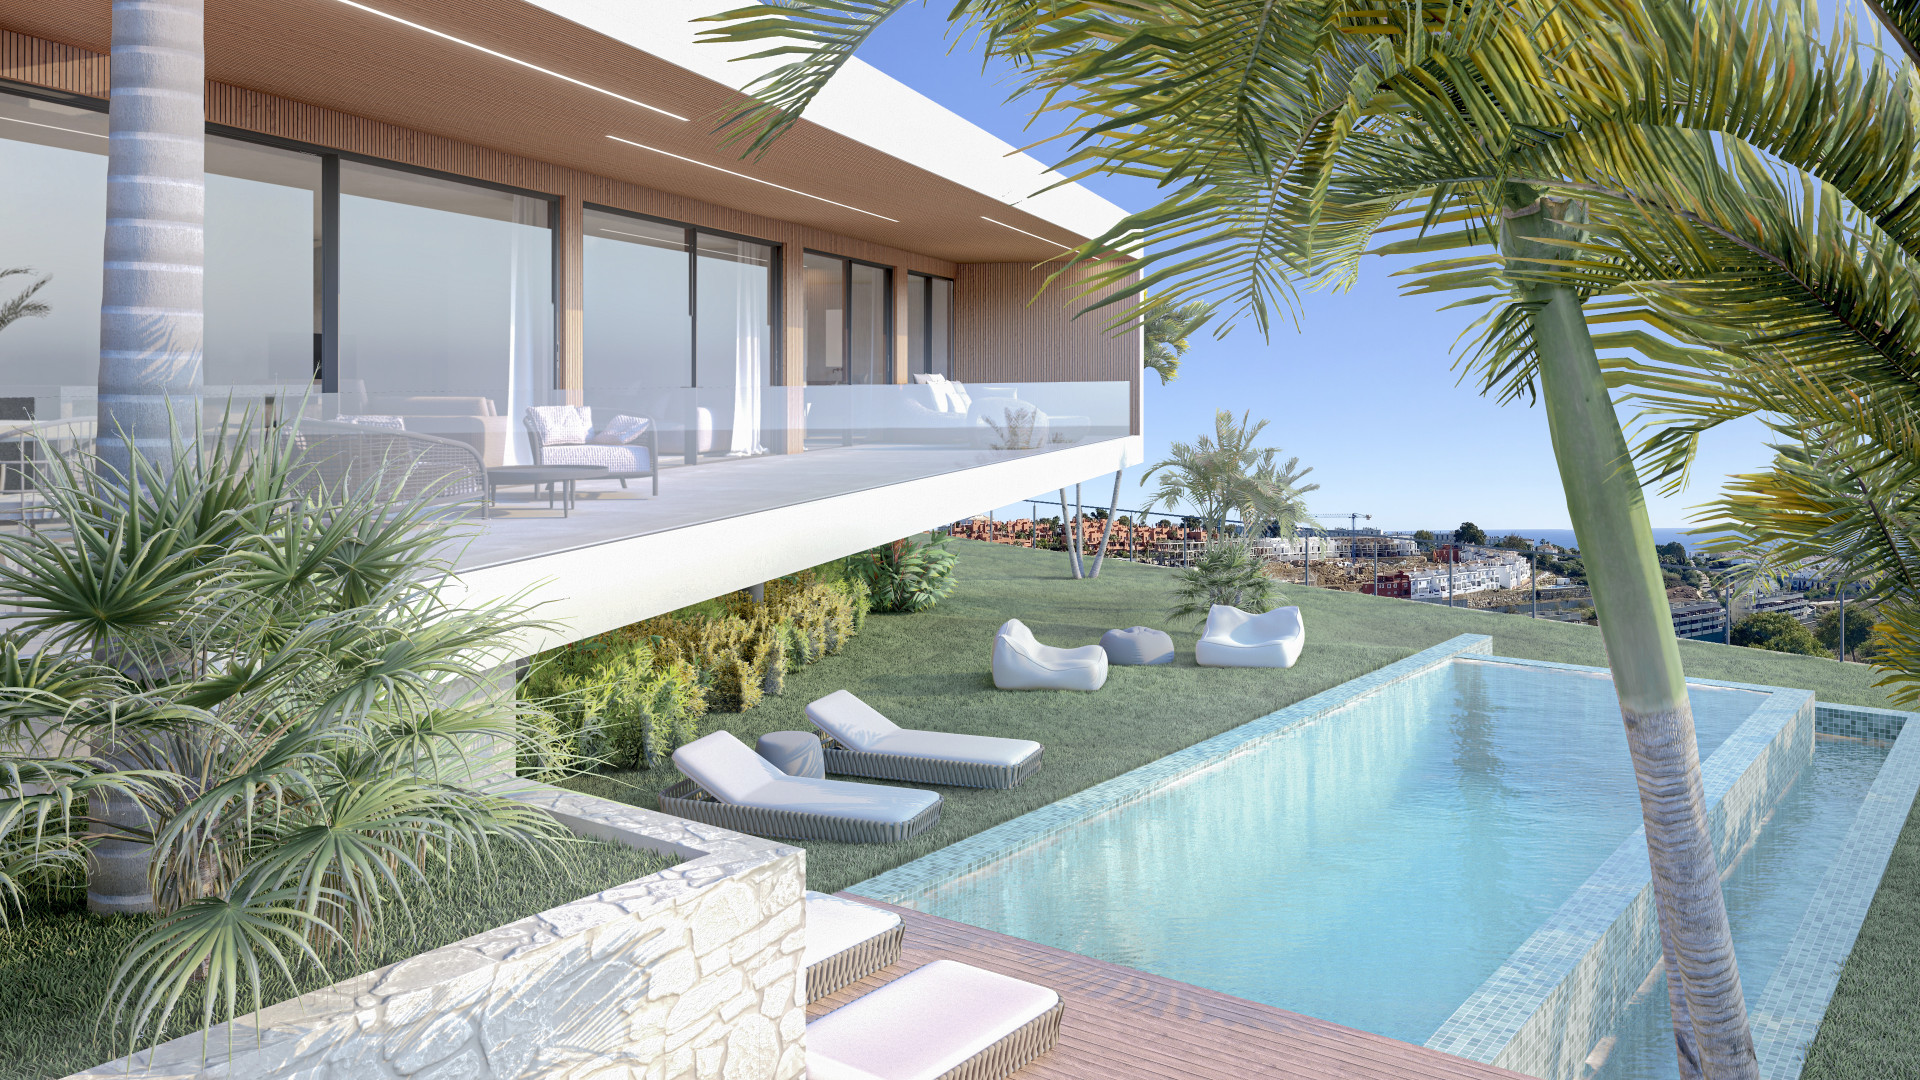 Turnkey contemporary styled detached villa project for sale in Sotogrande - Manilva